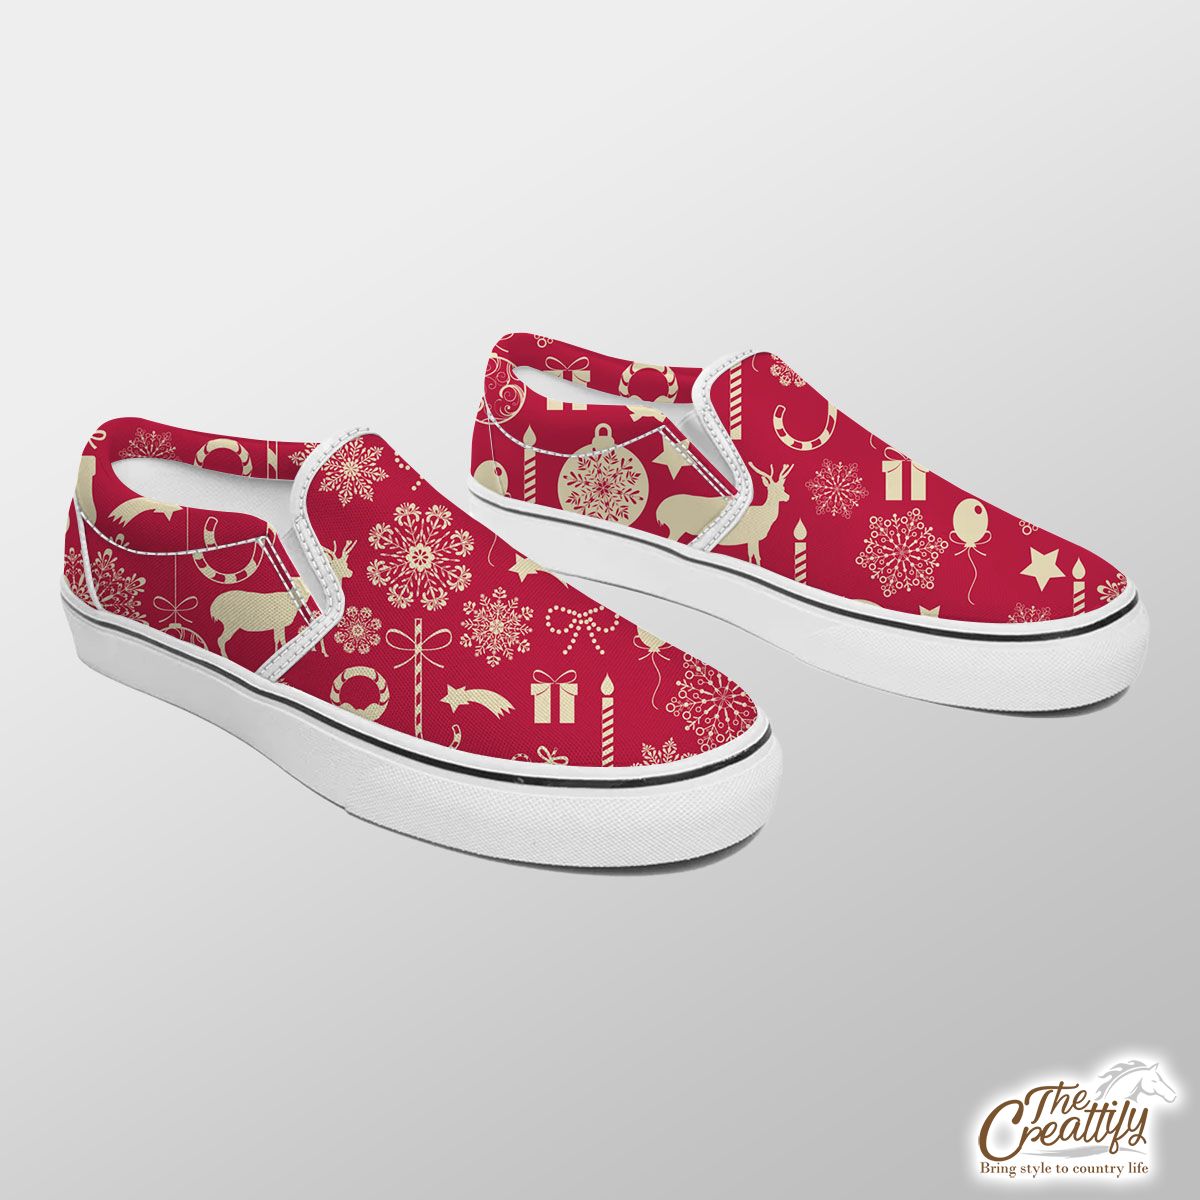 Happy Christmas With Reindeer, Christmas Balls, Socks, Candy Canes On Snowflake Background Slip On Sneakers